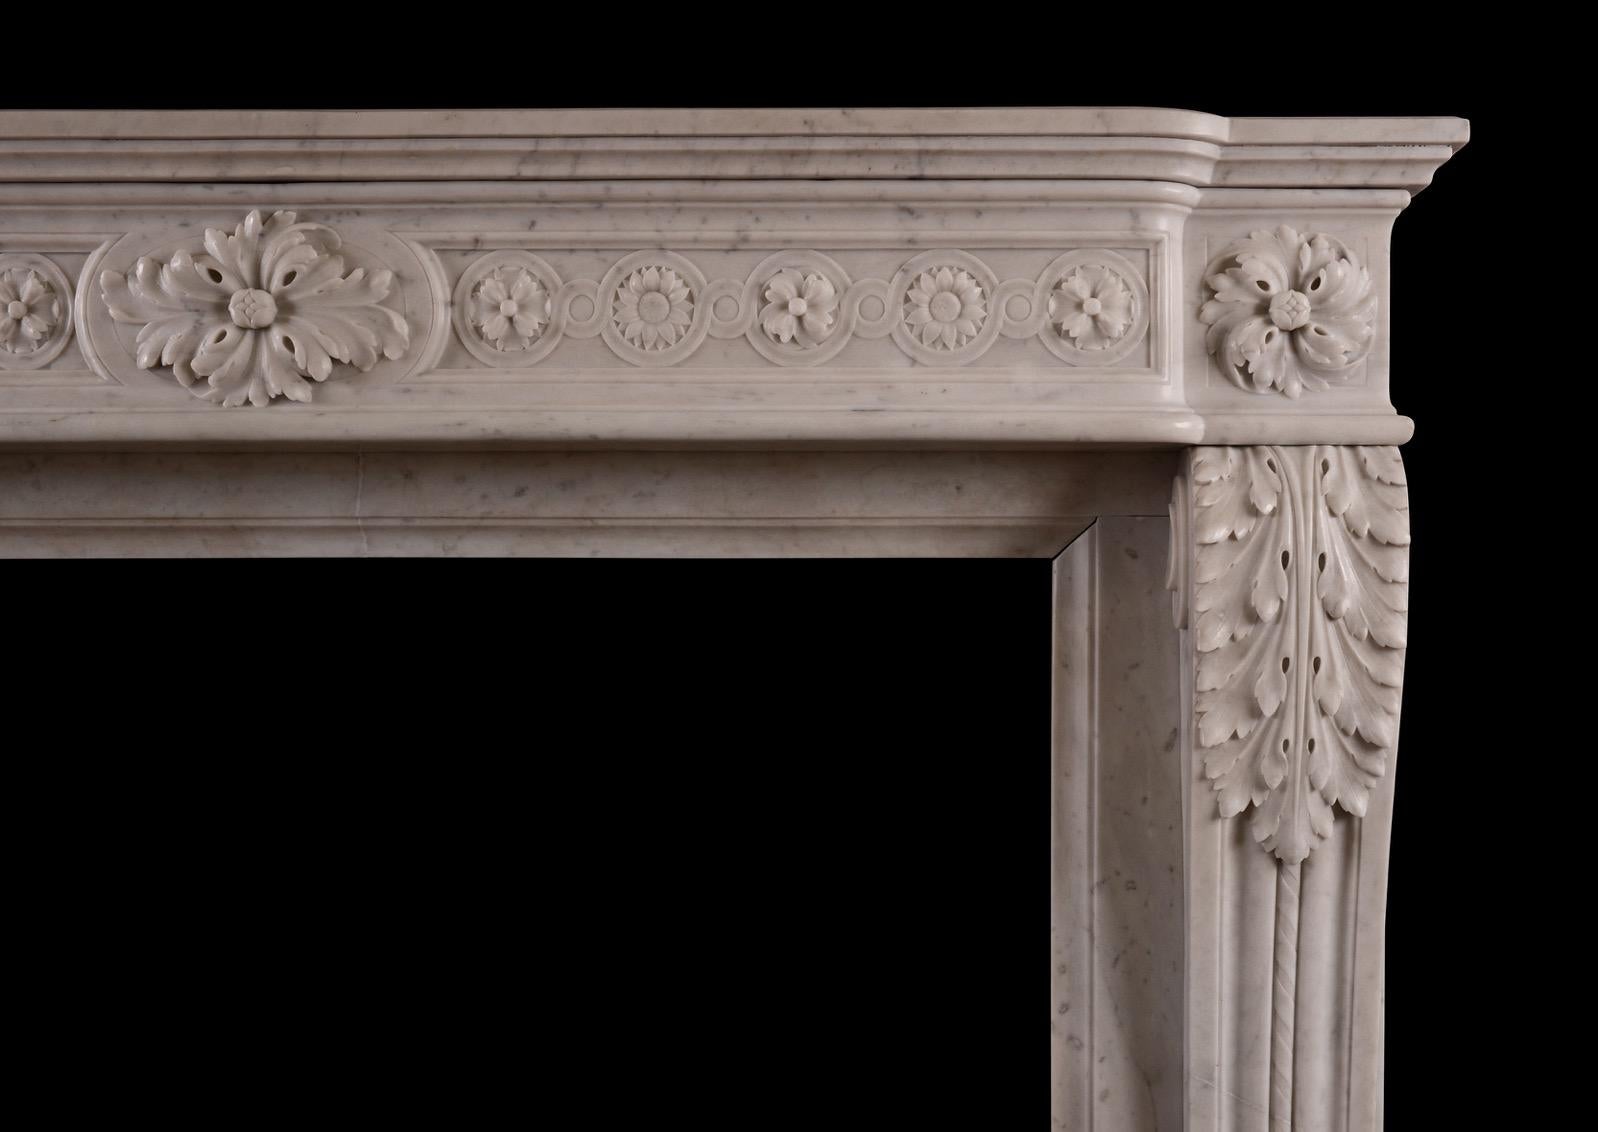 An unusually high mid 19th century French Louis XVI style fireplace in Carrara marble. The delicately carved shaped frieze with floral guilloche pattern, oval patera to centre and swirling end blockings. The jambs with carved scroll to base and